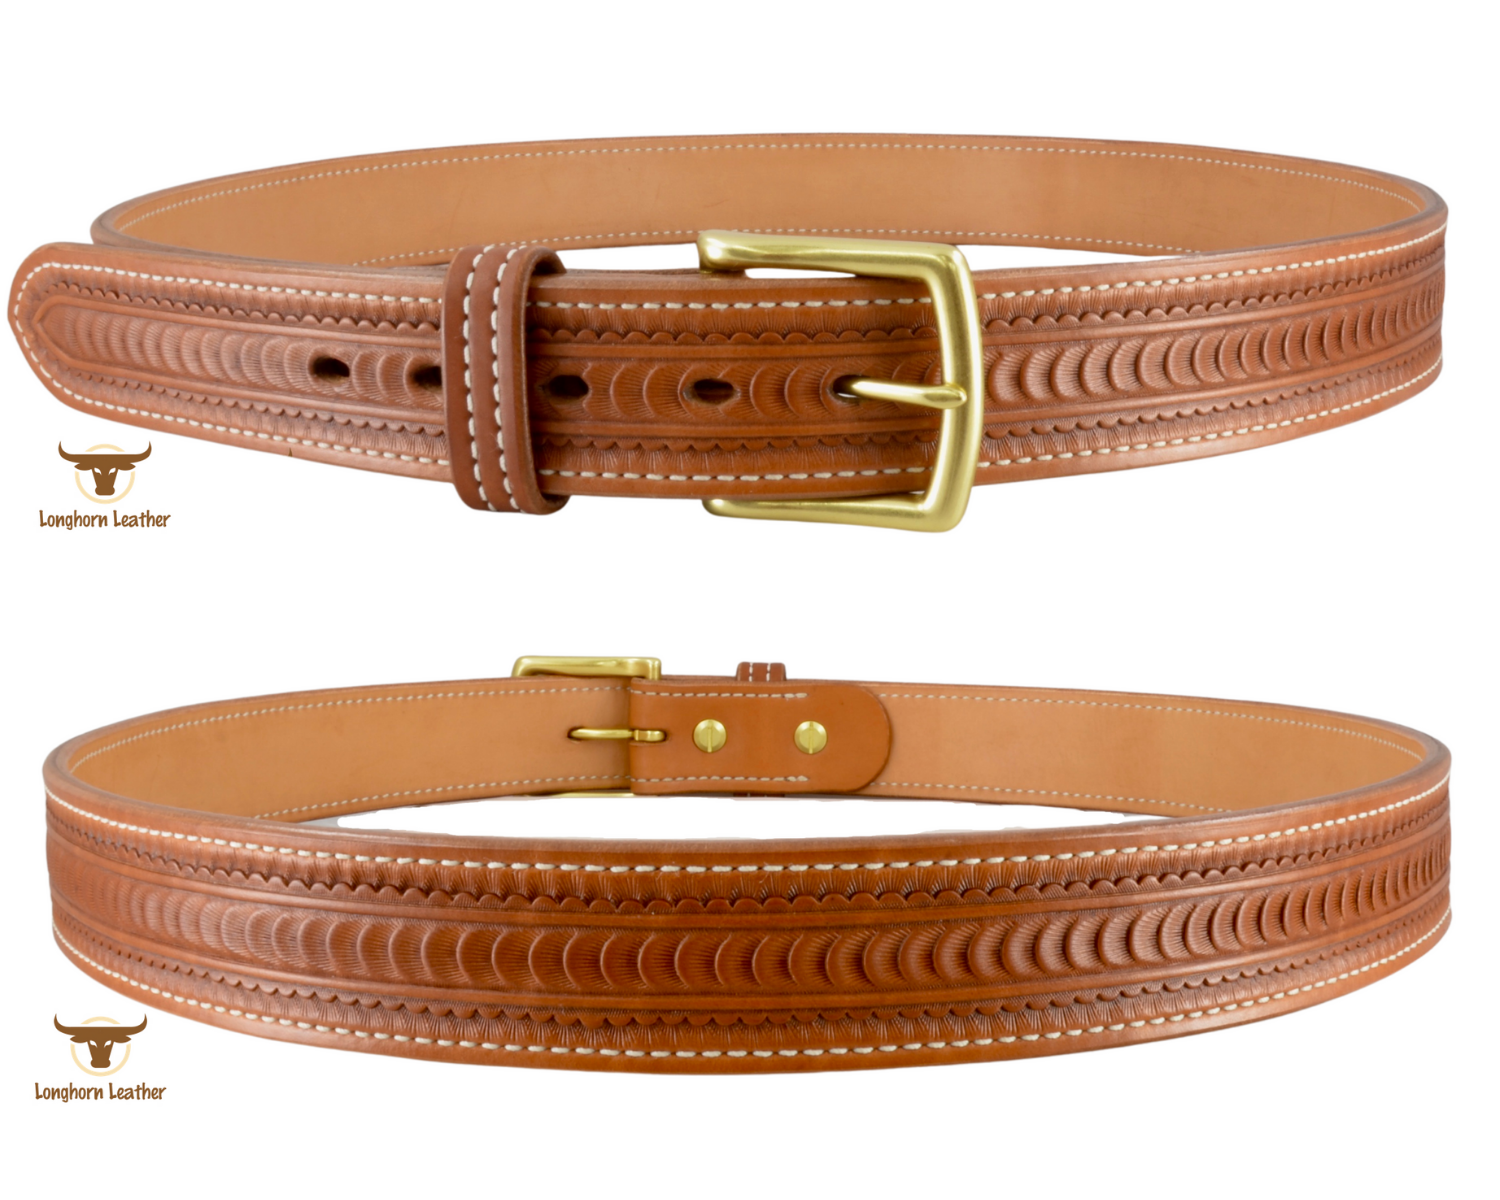 Custom leather belt featuring the "Tucson" design.  Individually handcrafted at Longhorn Leather AZ